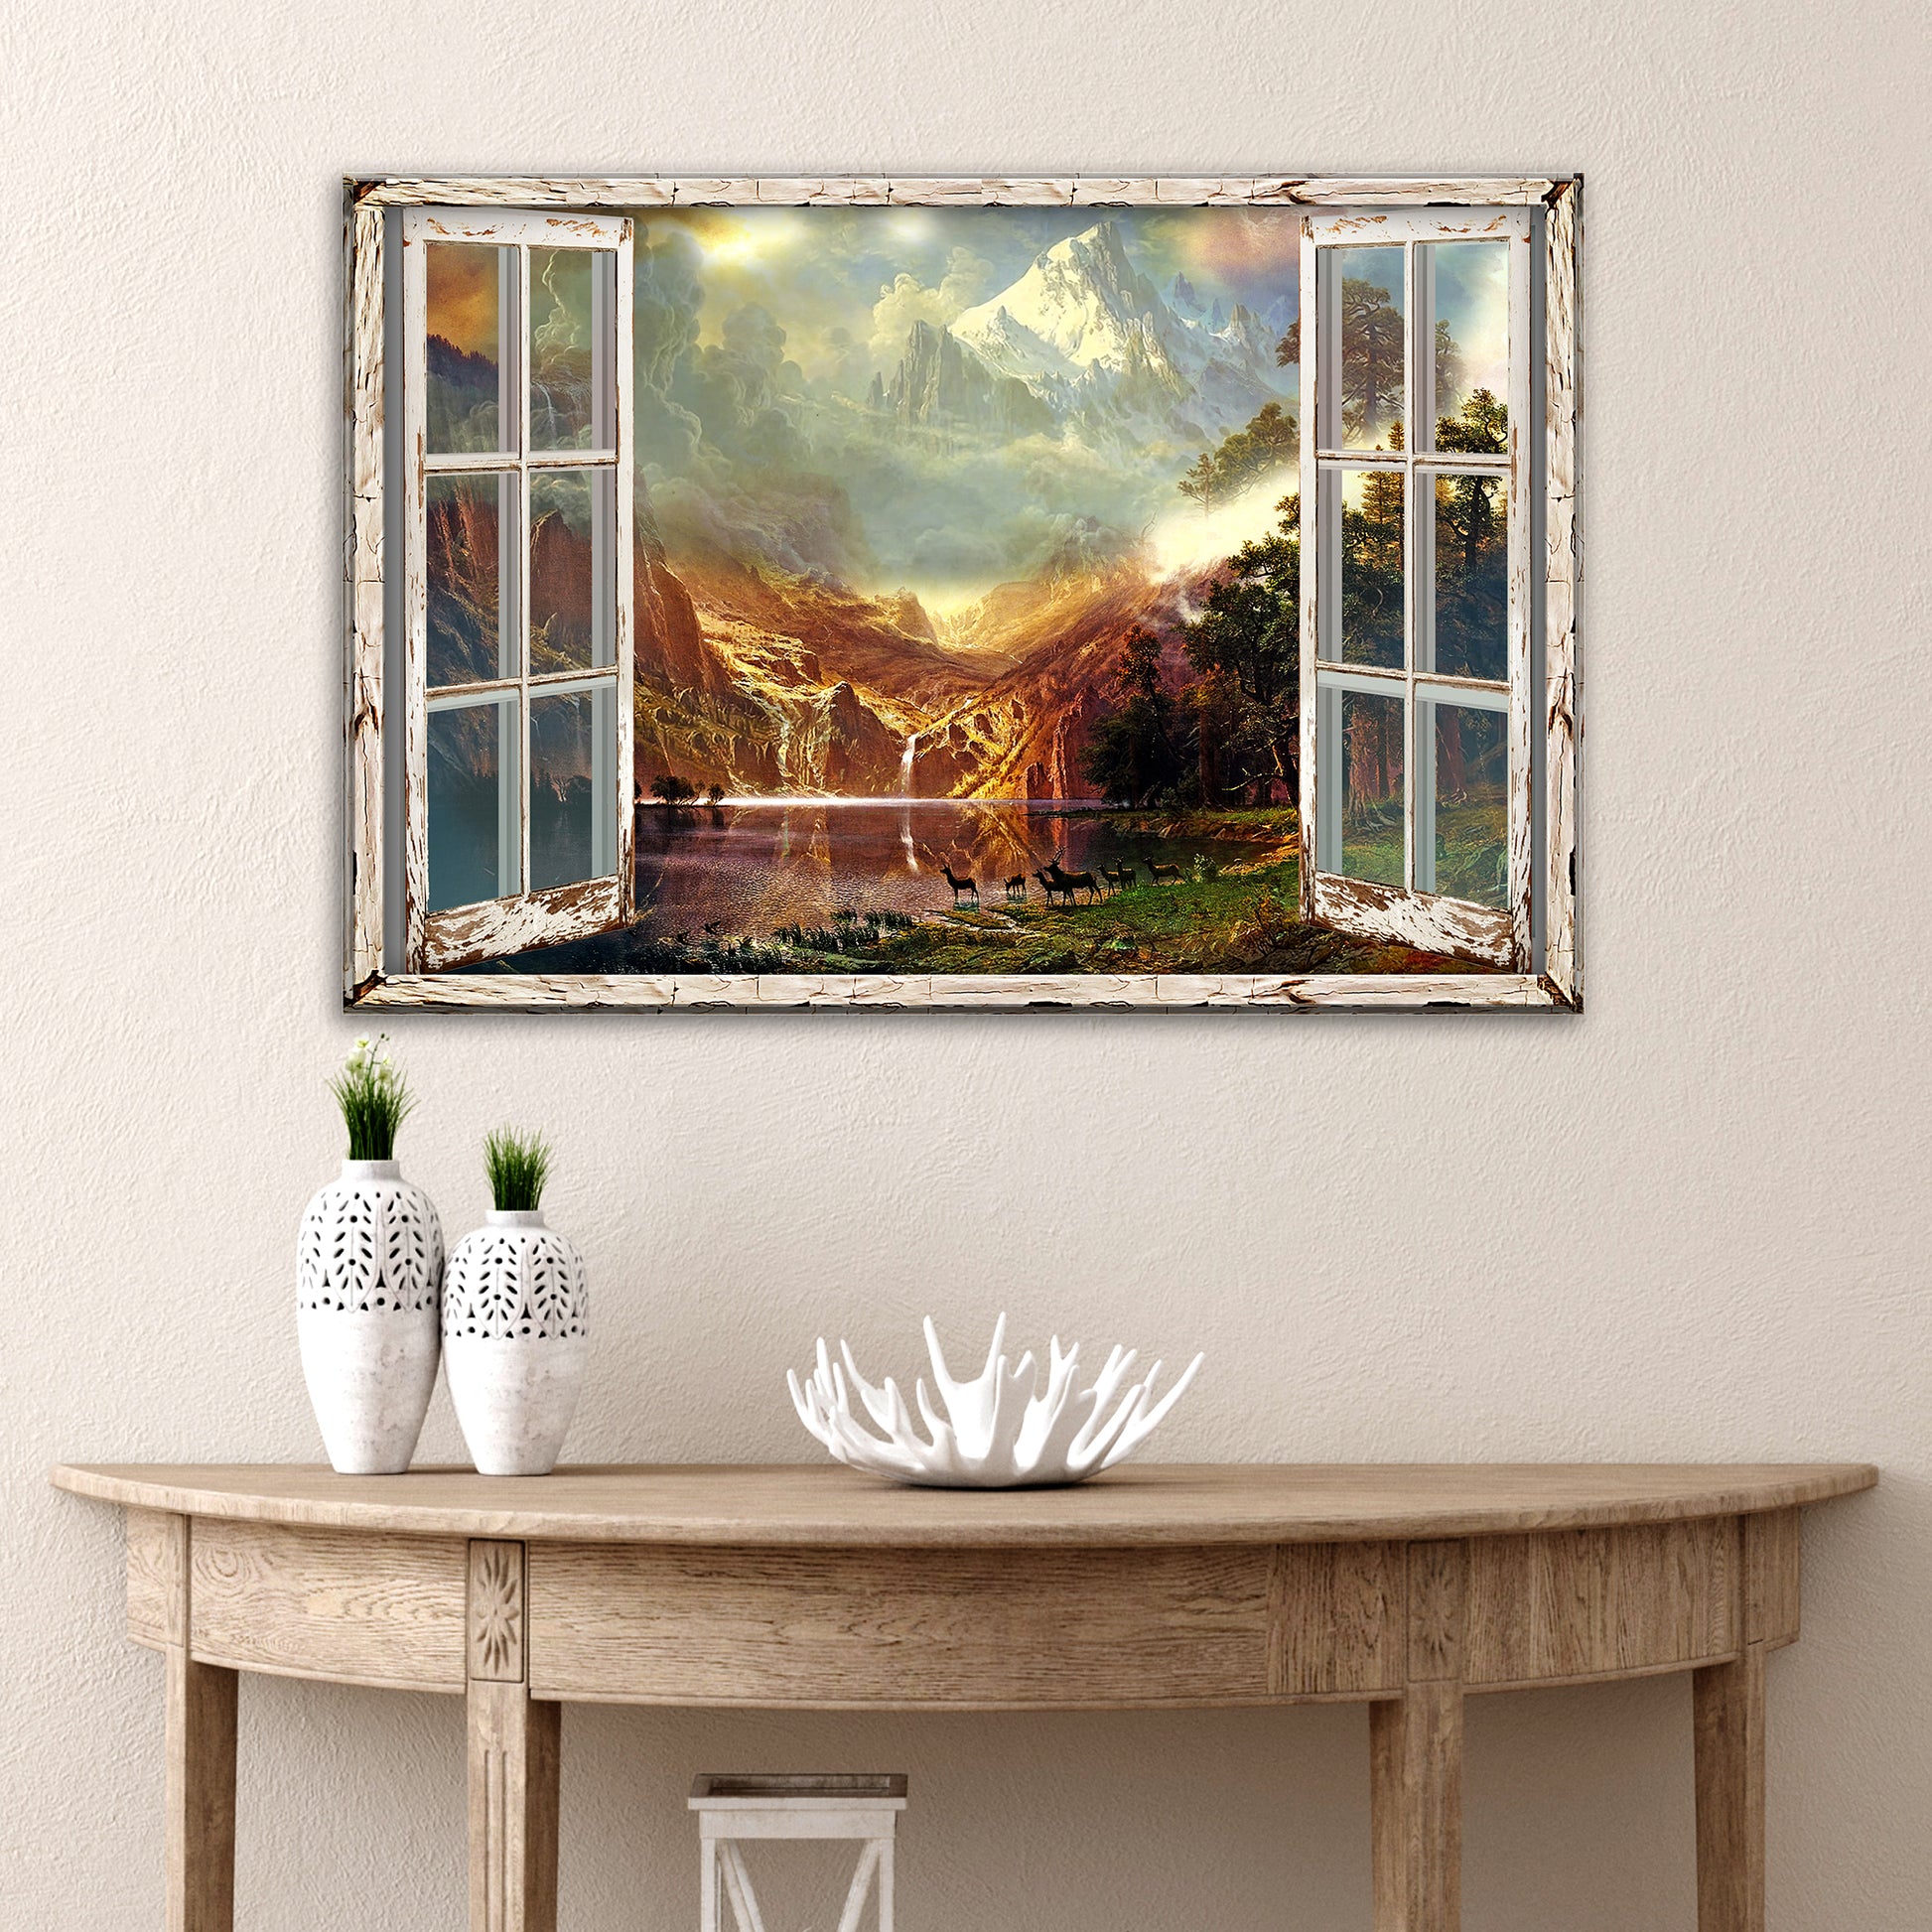 Lake By The Window Canvas Wall Art Style 2 - Image by Tailored Canvases